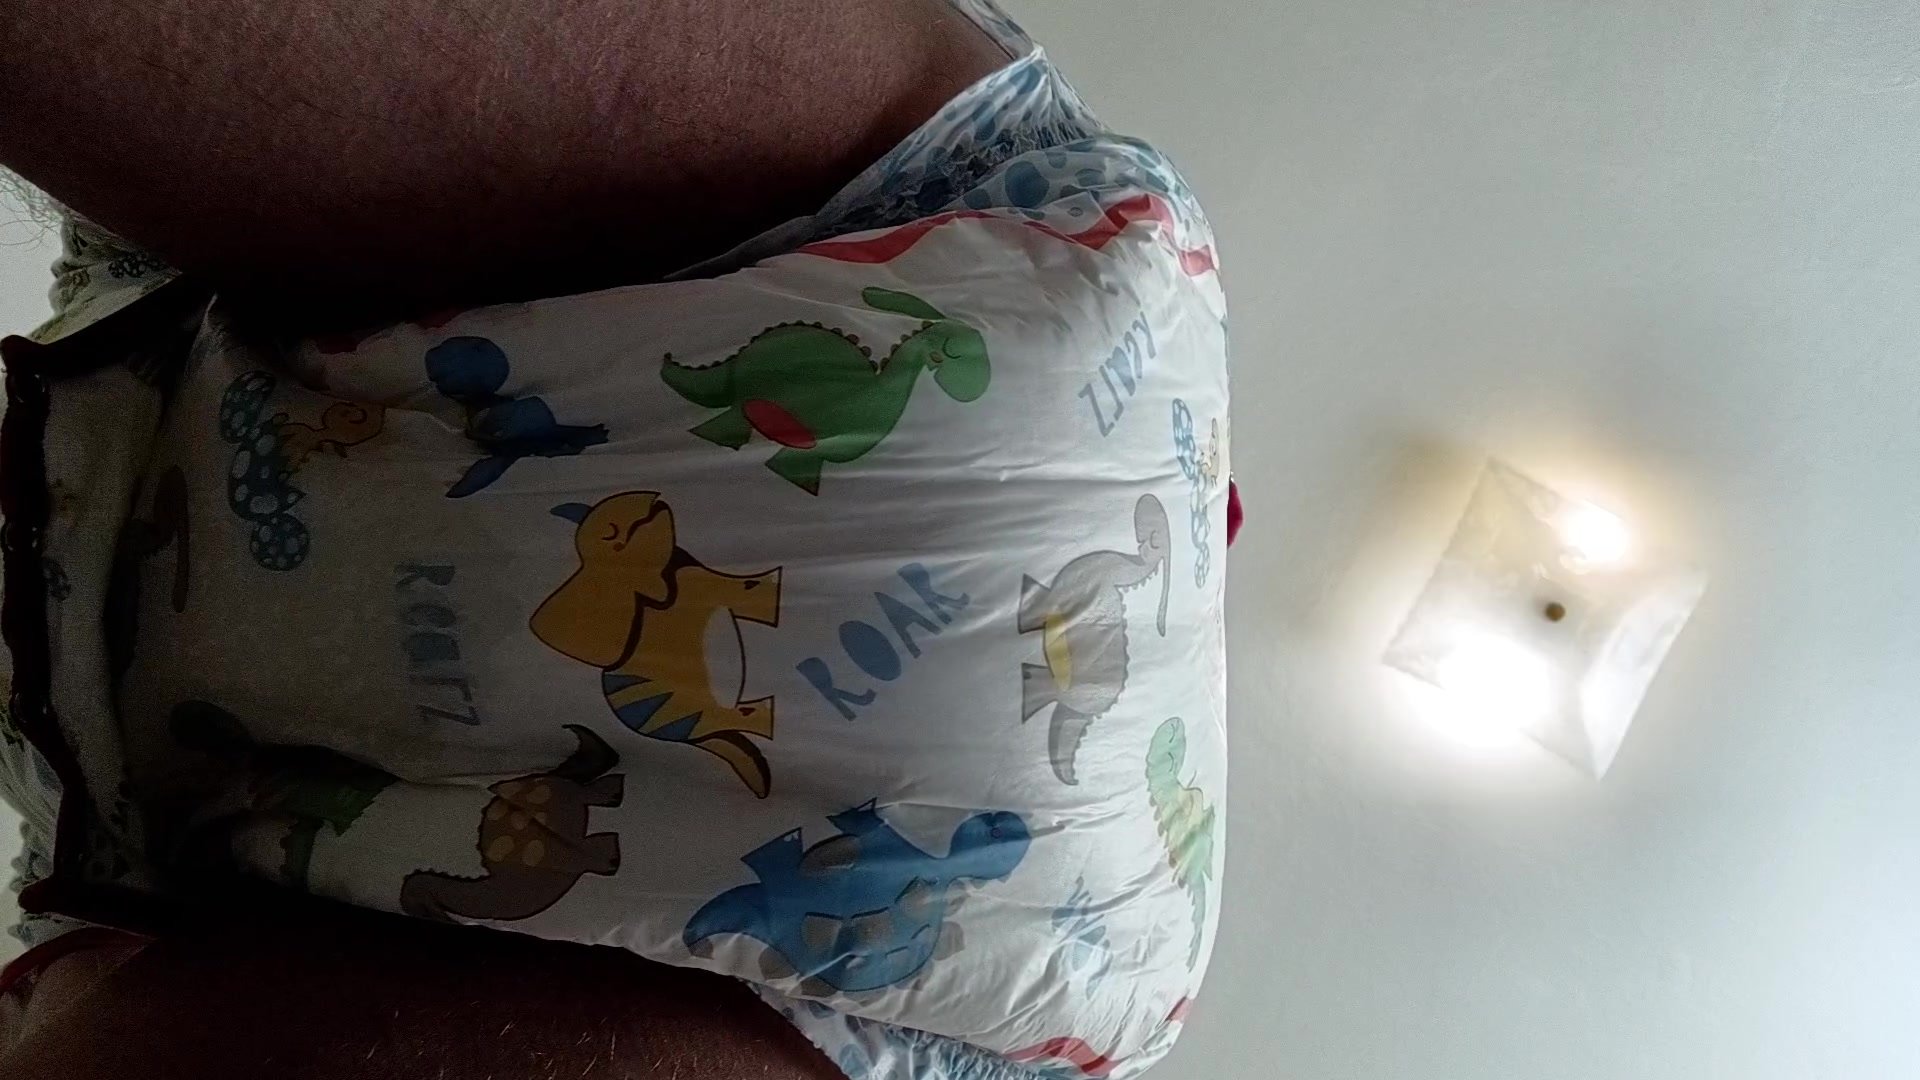 Boy wets and messes his diaper - video 2